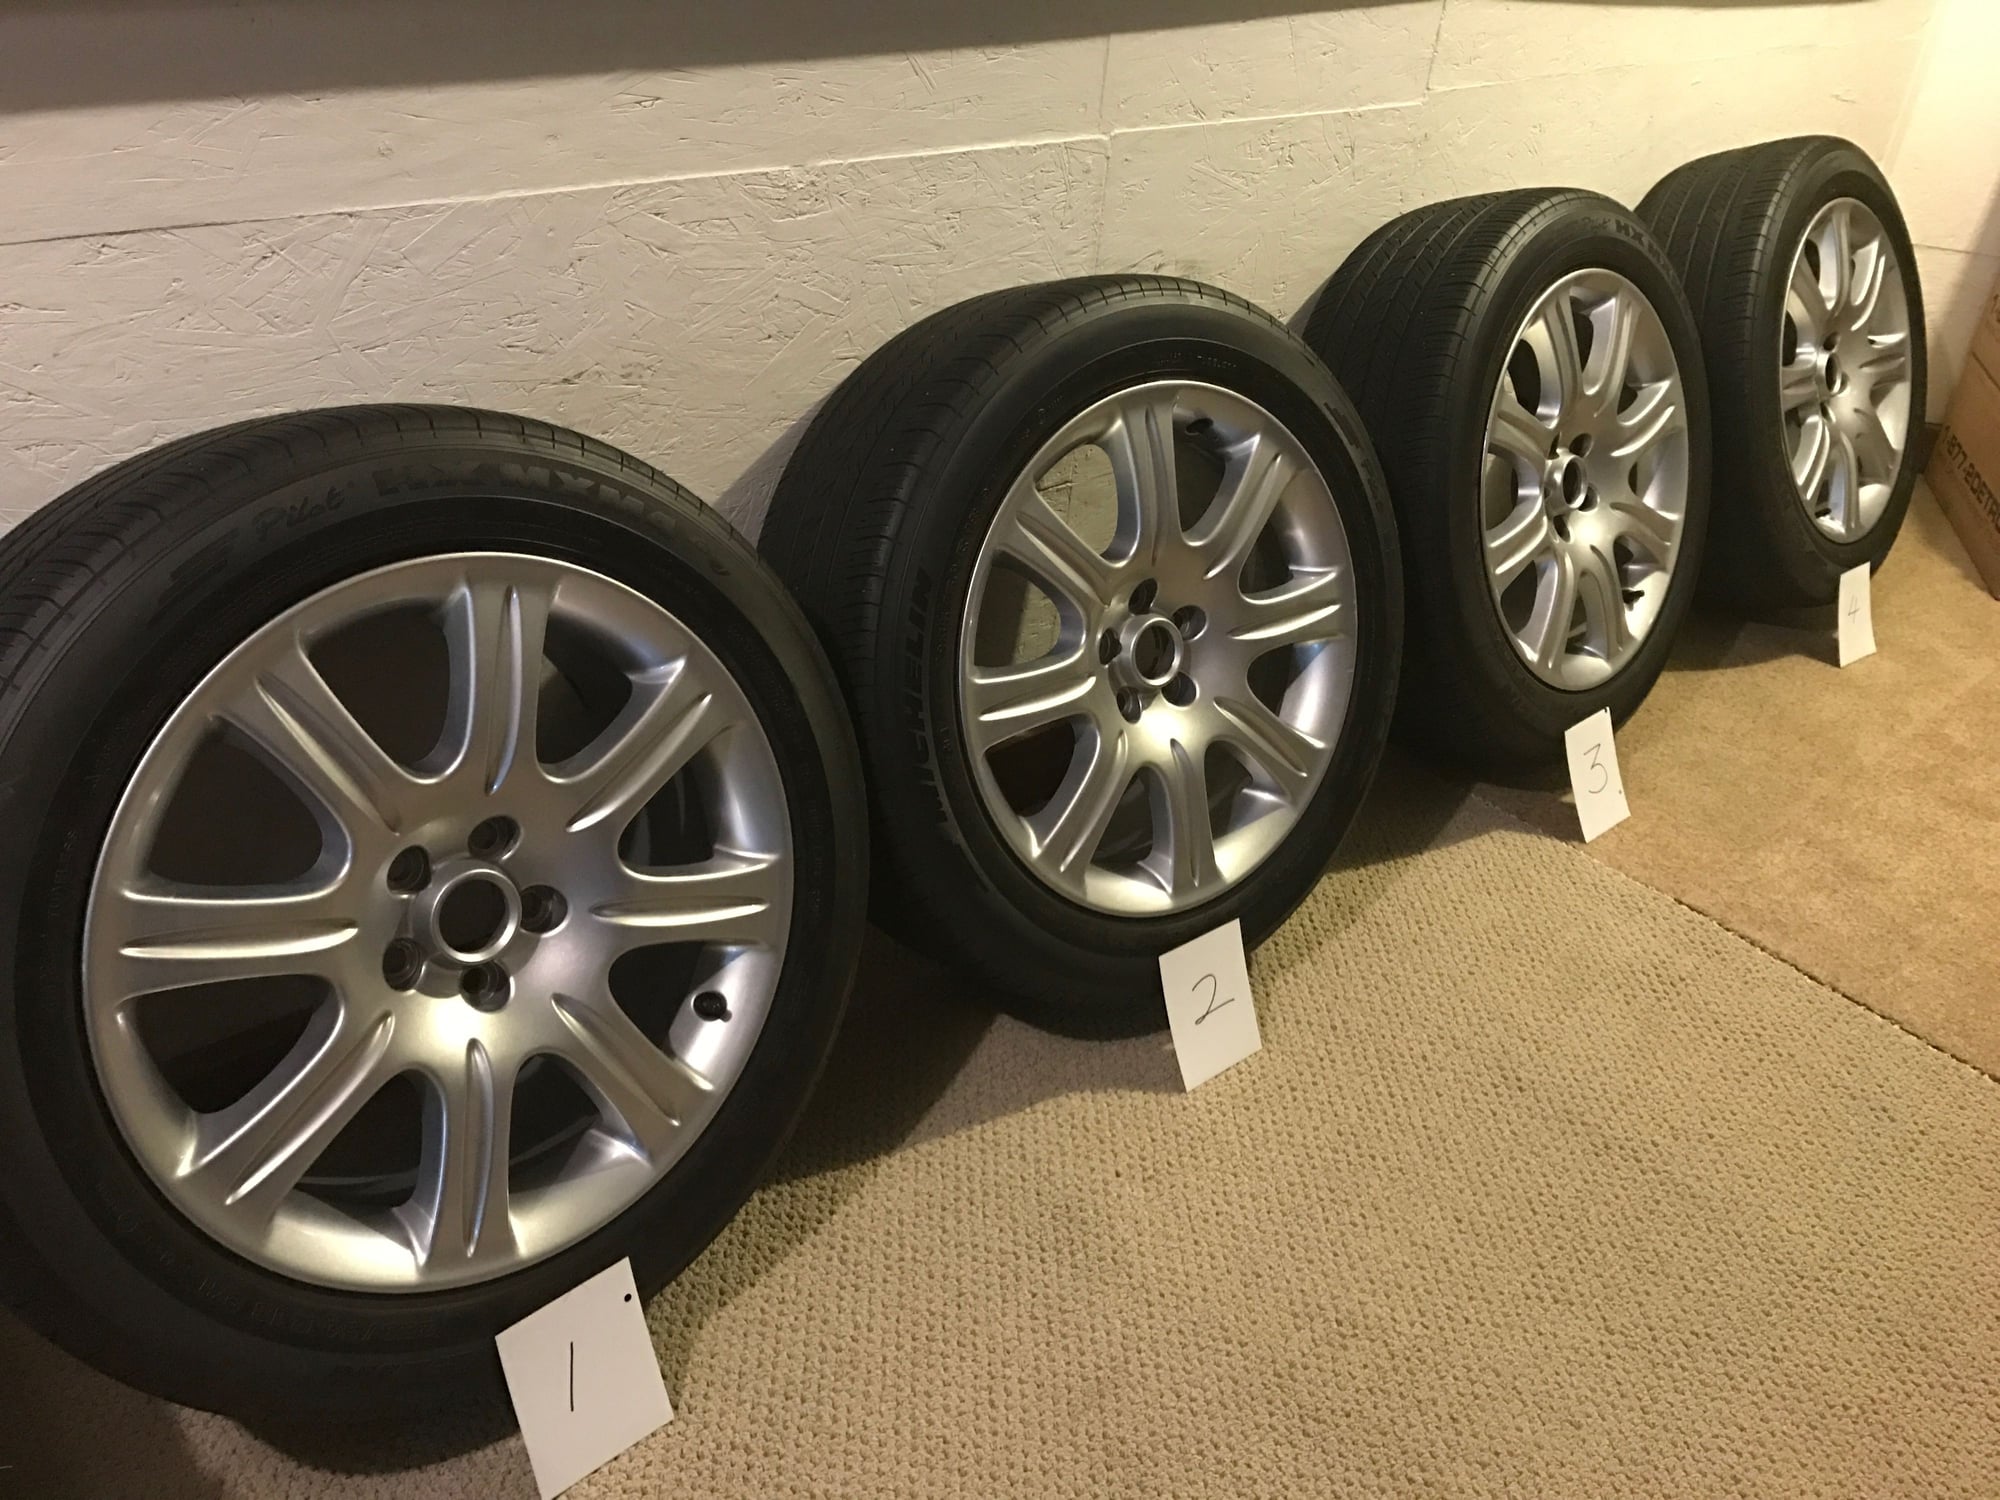 Wheels and Tires/Axles - Set of wheels & tires from 2004 XJ8 - Used - 2004 to 2008 Jaguar XJ8 - Anacortes, WA 98221, United States